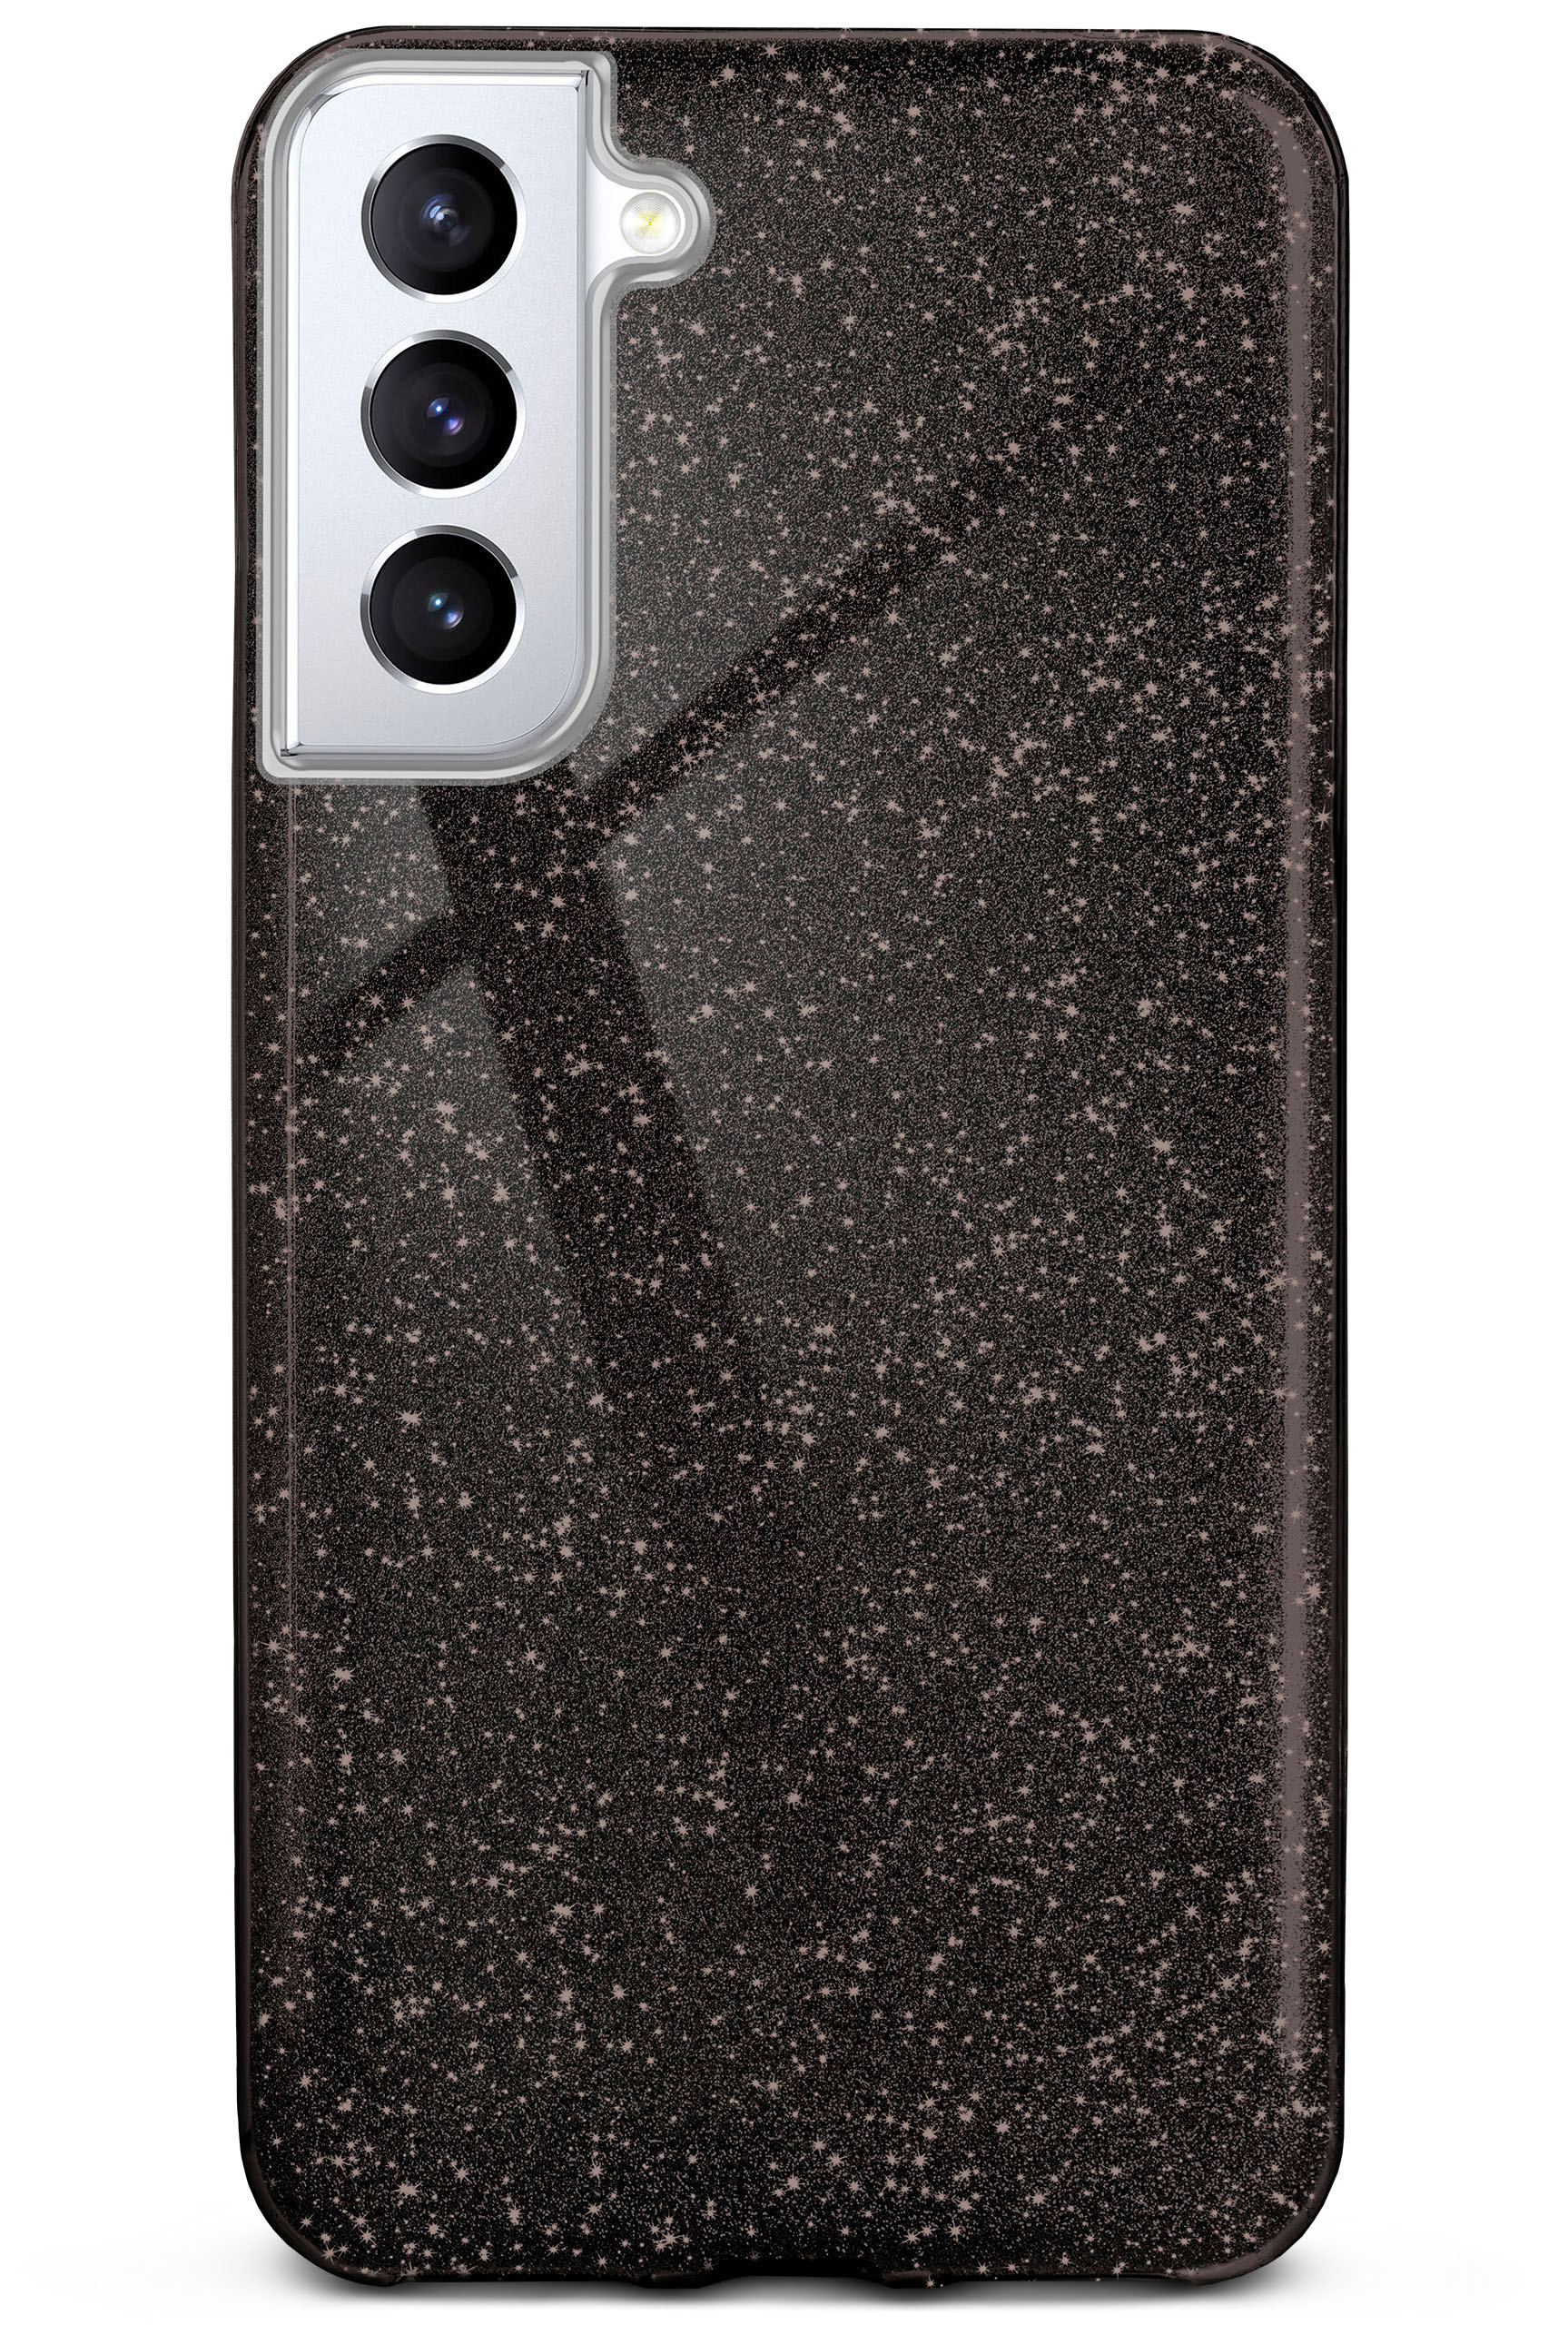 Galaxy Glamour Glitter Case, Black Samsung, - ONEFLOW Backcover, S21,